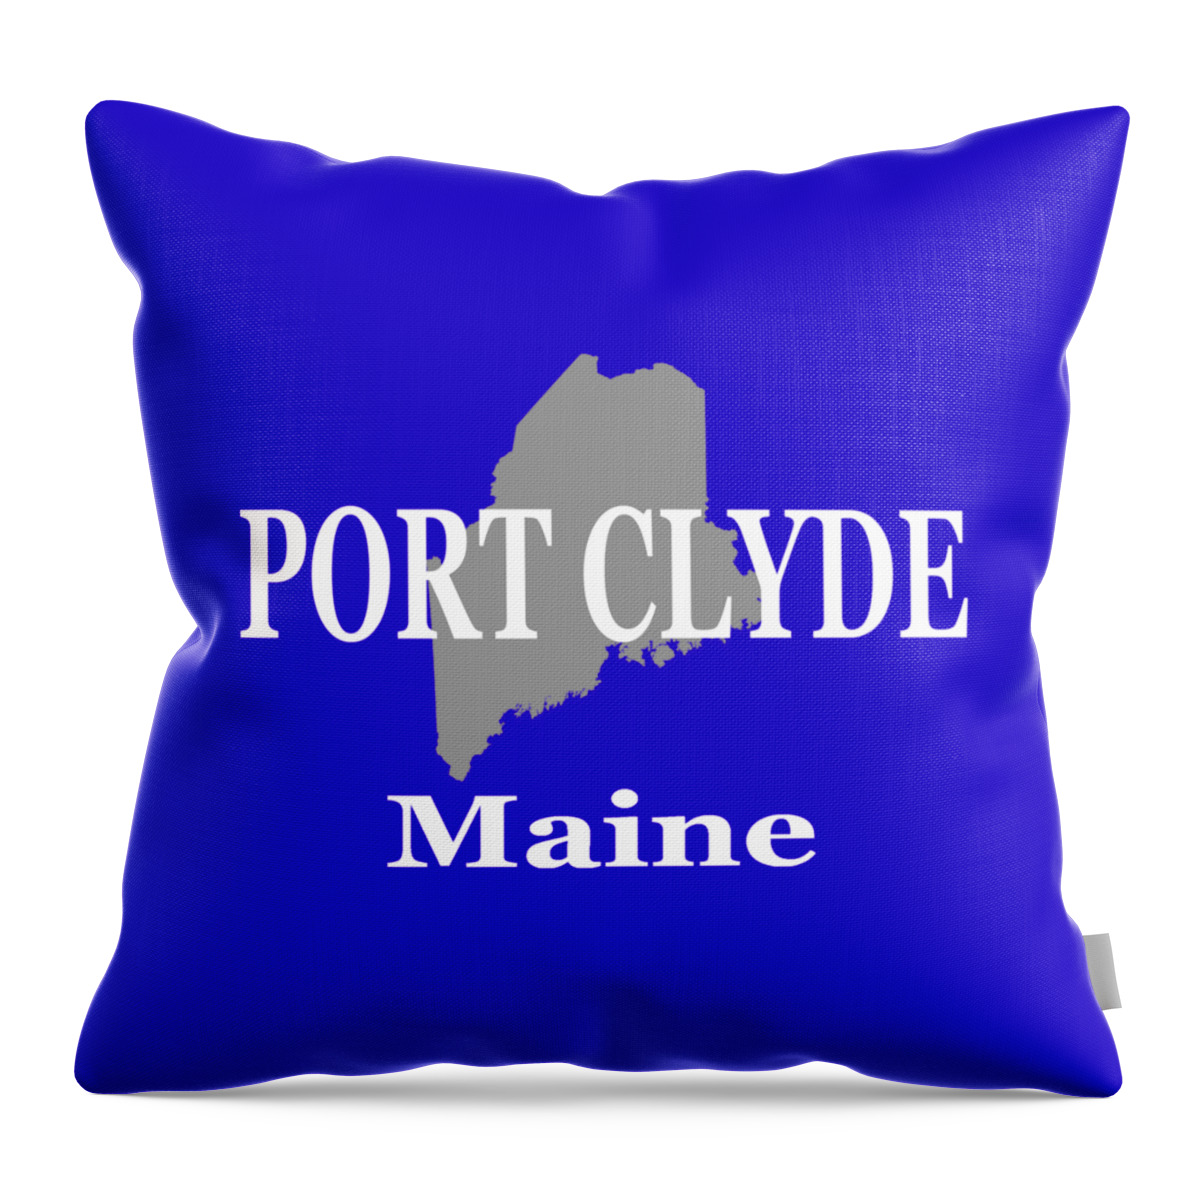 Port Clyde; Maine; Maine Home; Maine Pride; Souviner; Maine Map; Hometown; State Pride; Travel Souvenir; Vacation; Cities And Towns; City; Cities; Town; Home State; Keepsake; States; City Pride; Town Pride; Tourism; Tourist Attractions; State Maps; Travel Destinations; Typographic; Vacation Destinations; United States Maps; Map Art; American States Throw Pillow featuring the photograph Port Clyde Maine State City and Town Pride by Keith Webber Jr